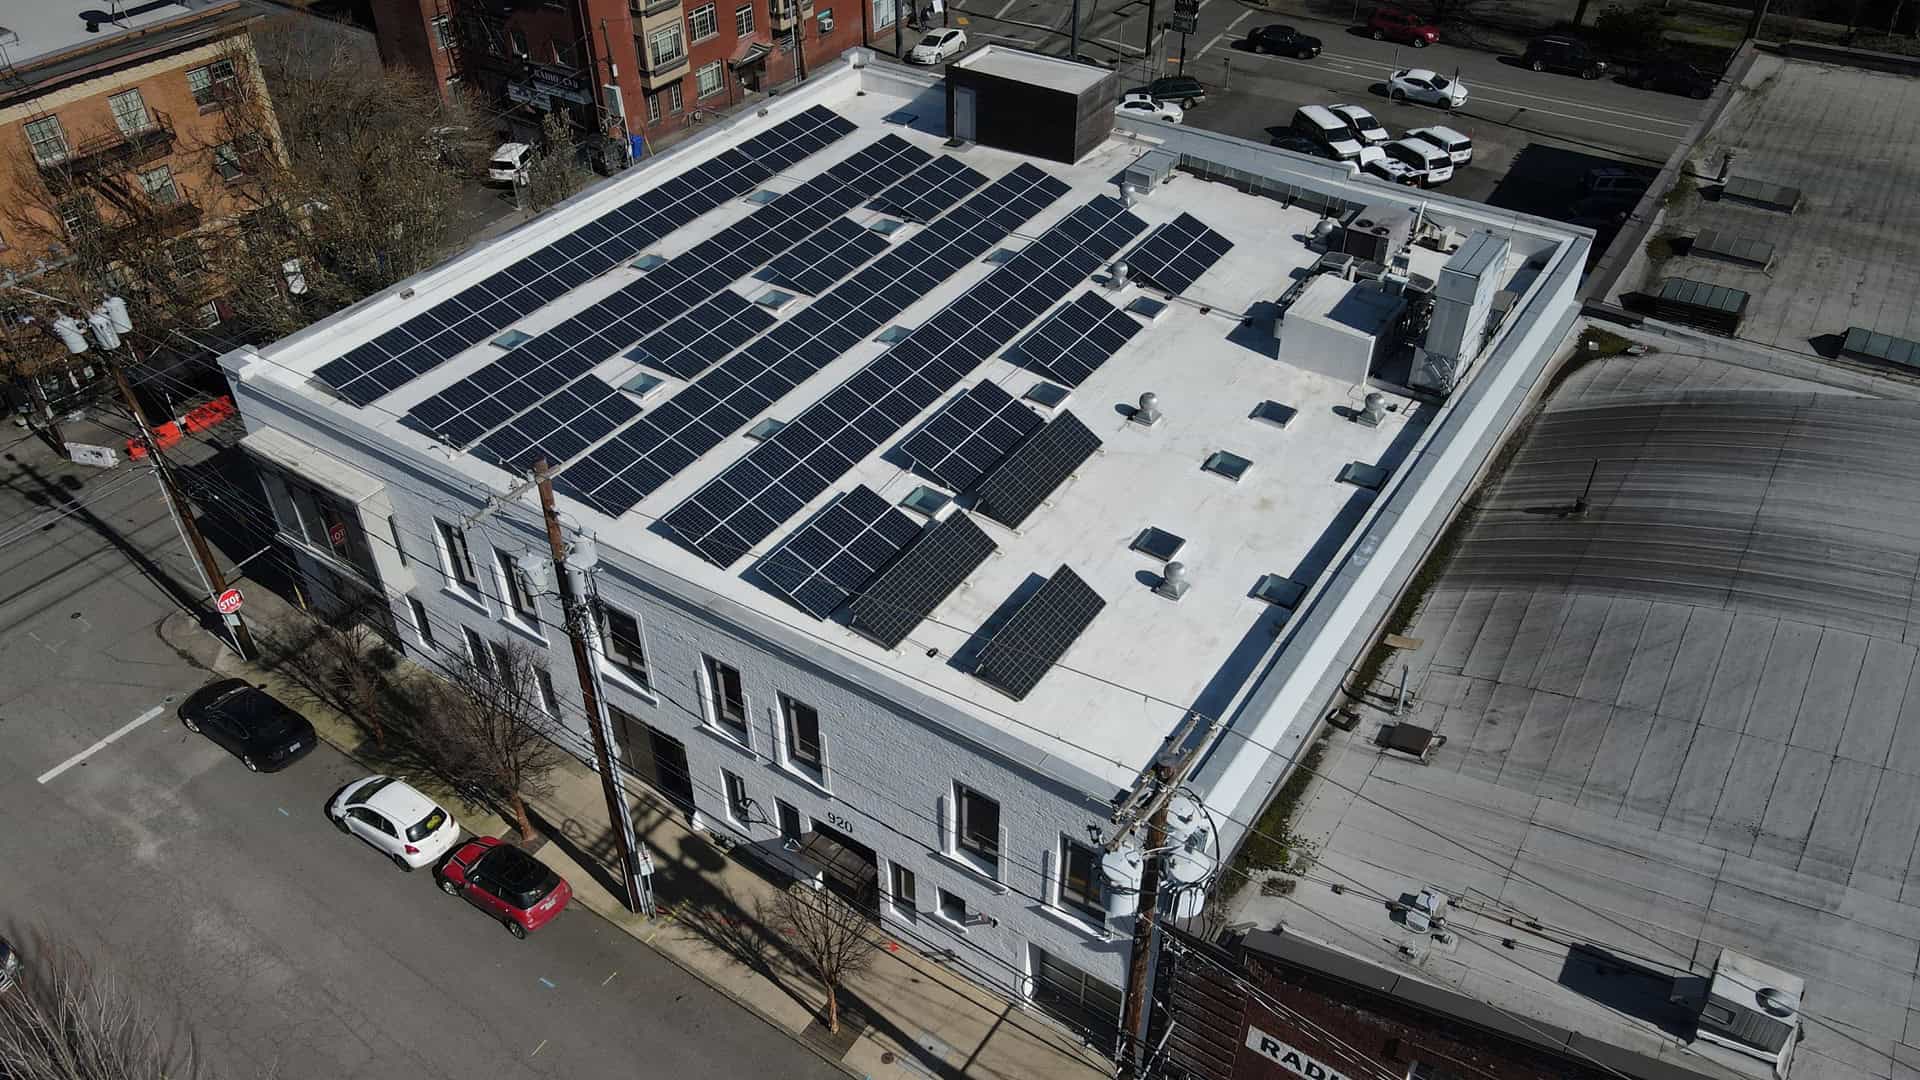 Solar panels on a commercial building in Portland Oregon